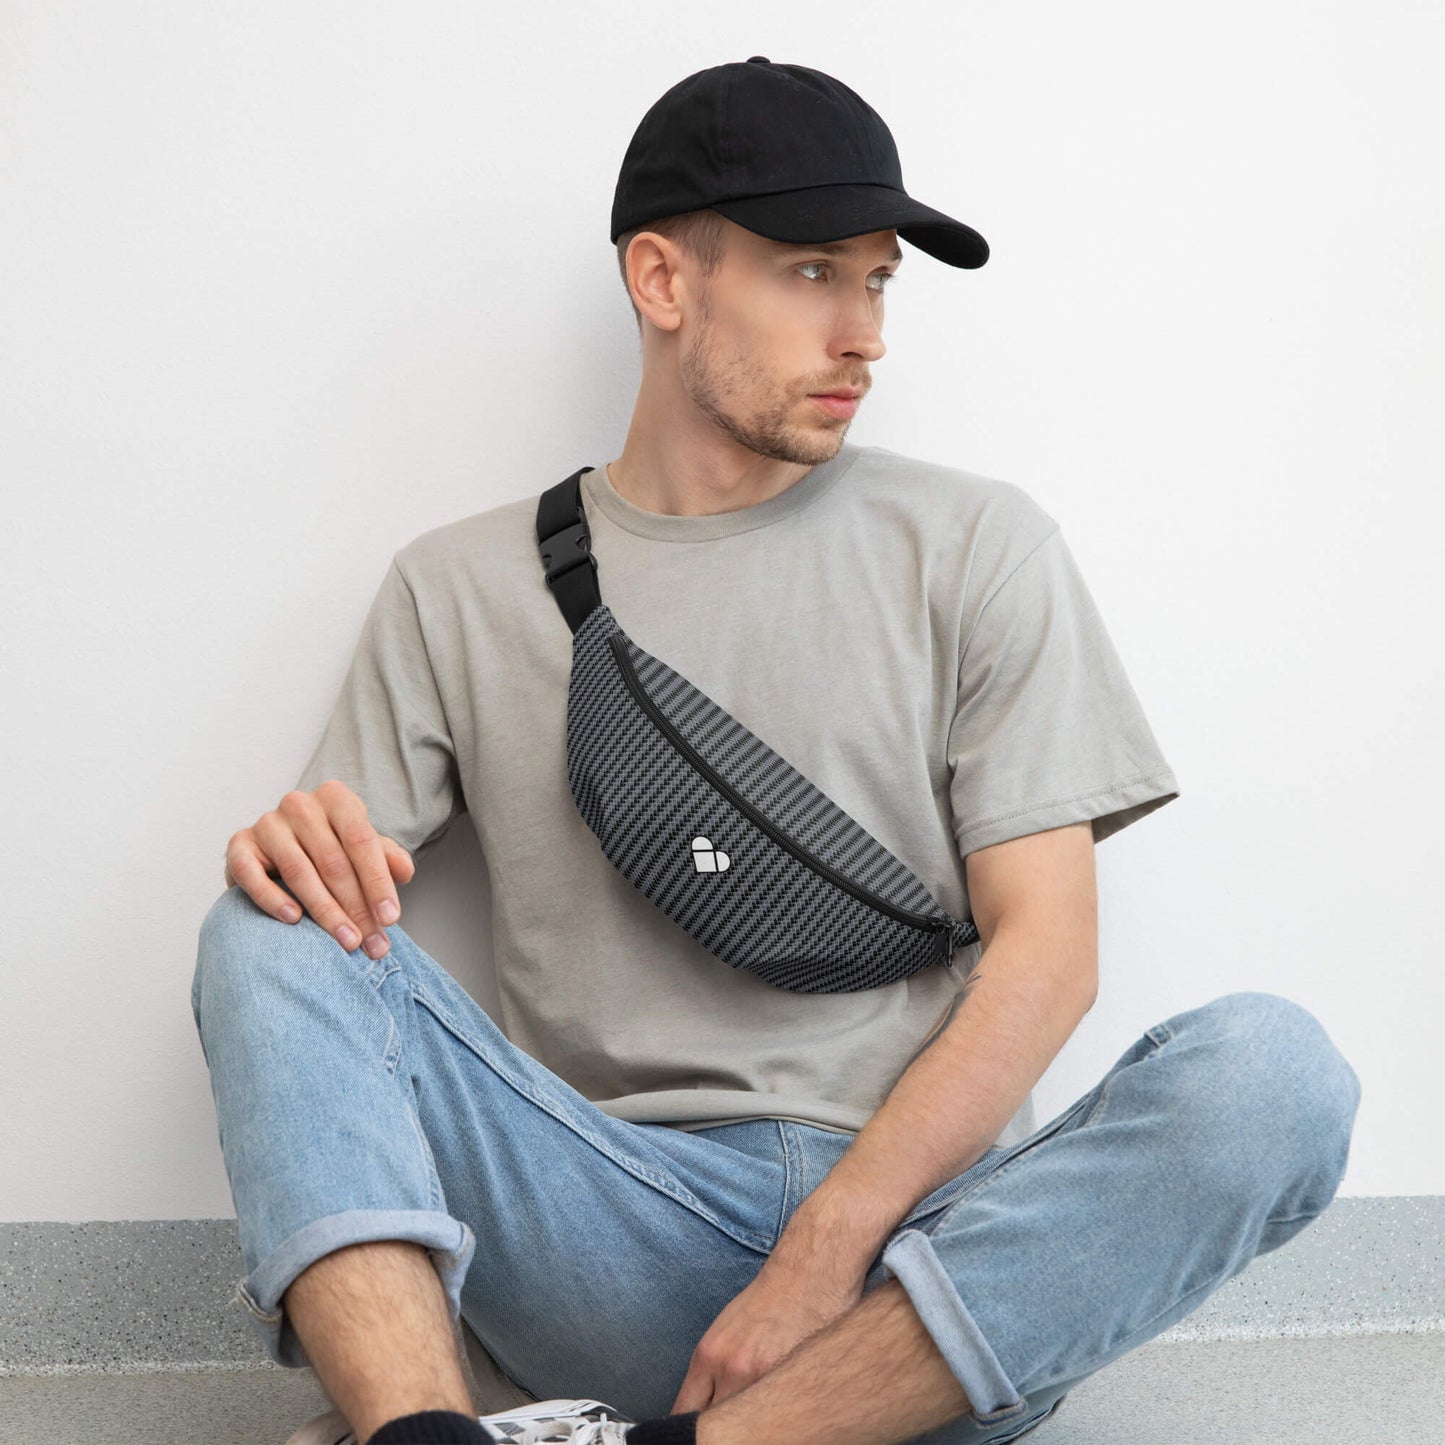 male model wearing Versatile black fanny pack for daily use or sports from Amor Primero Collection